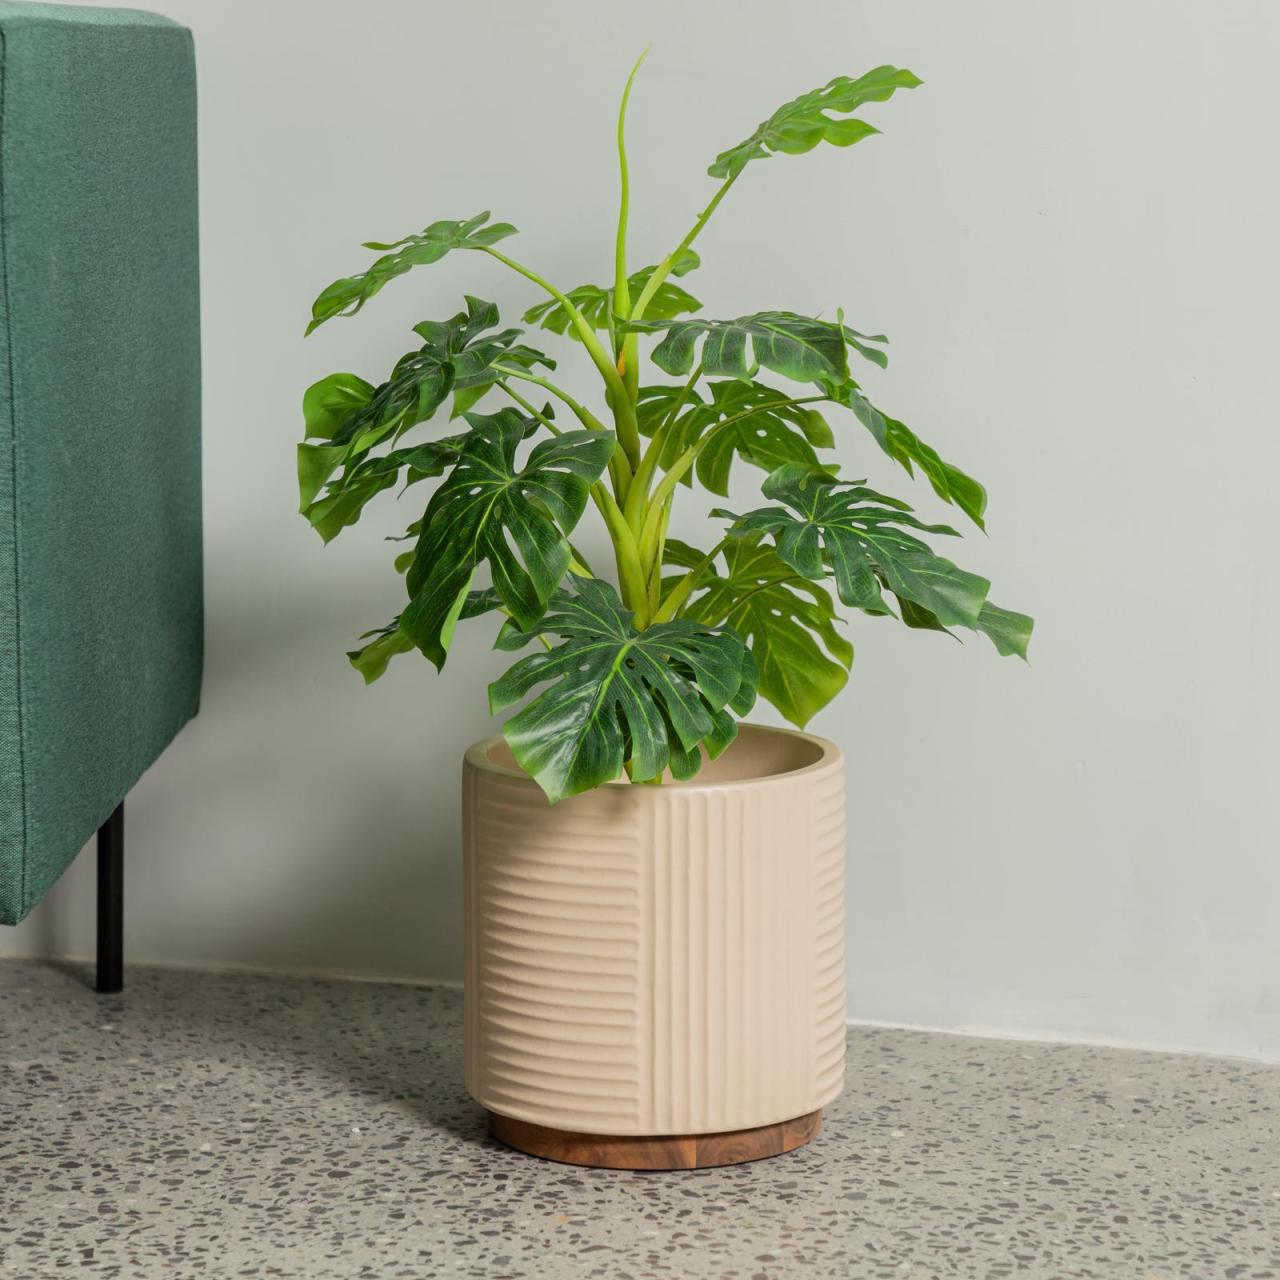 Hanging Plants Indoor | Bunnings Lotus Pots: A Comprehensive Guide to Aesthetics, Usage, and Care